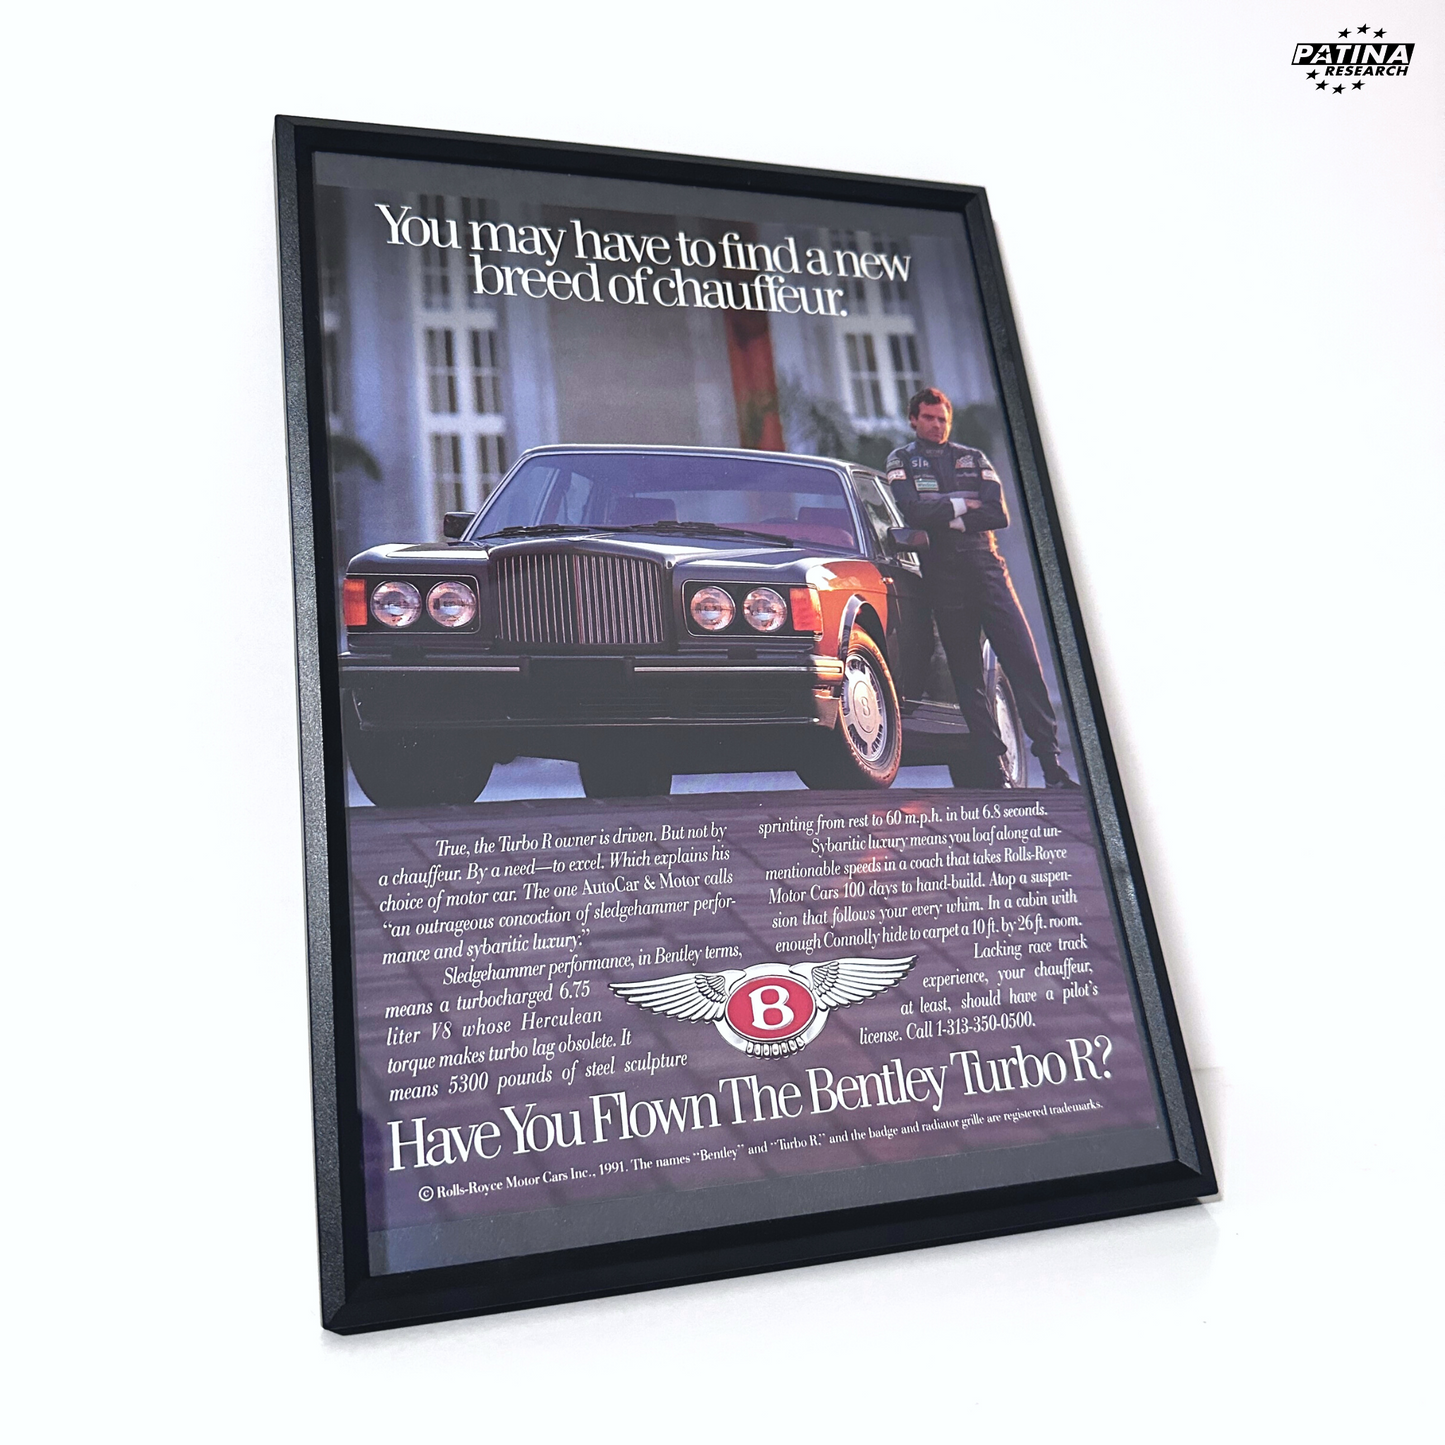 Have you flown the Bentley turbo R framed ad